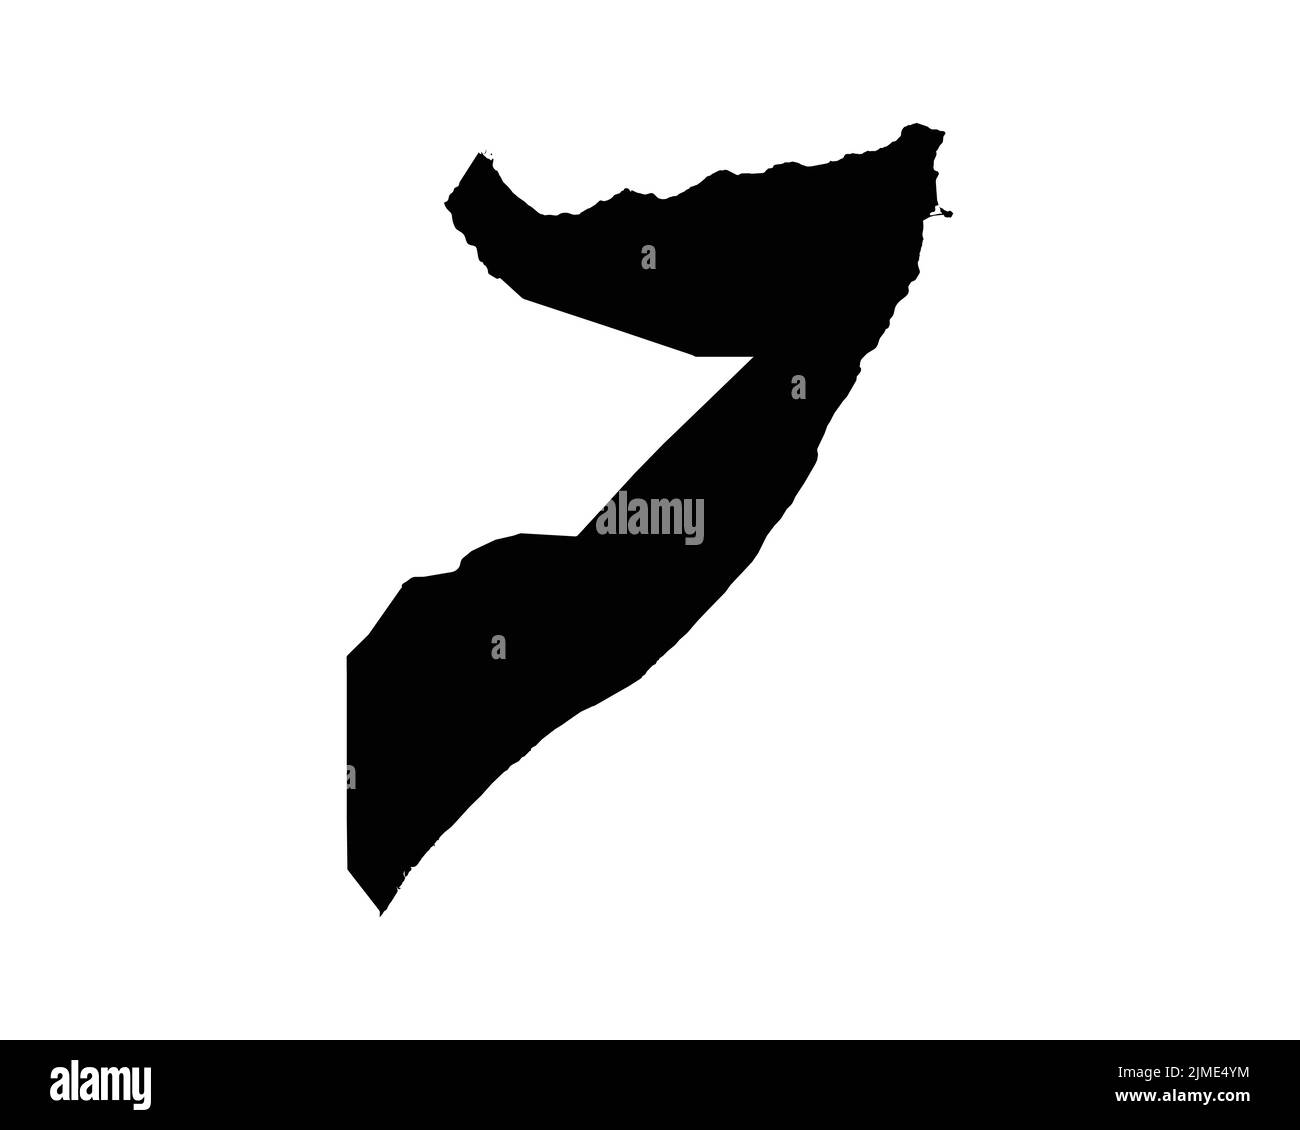 Somalia Map. Somali Country Map. Black and White Somalian National Nation Geography Outline Border Boundary Territory Shape Vector Illustration EPS Cl Stock Vector